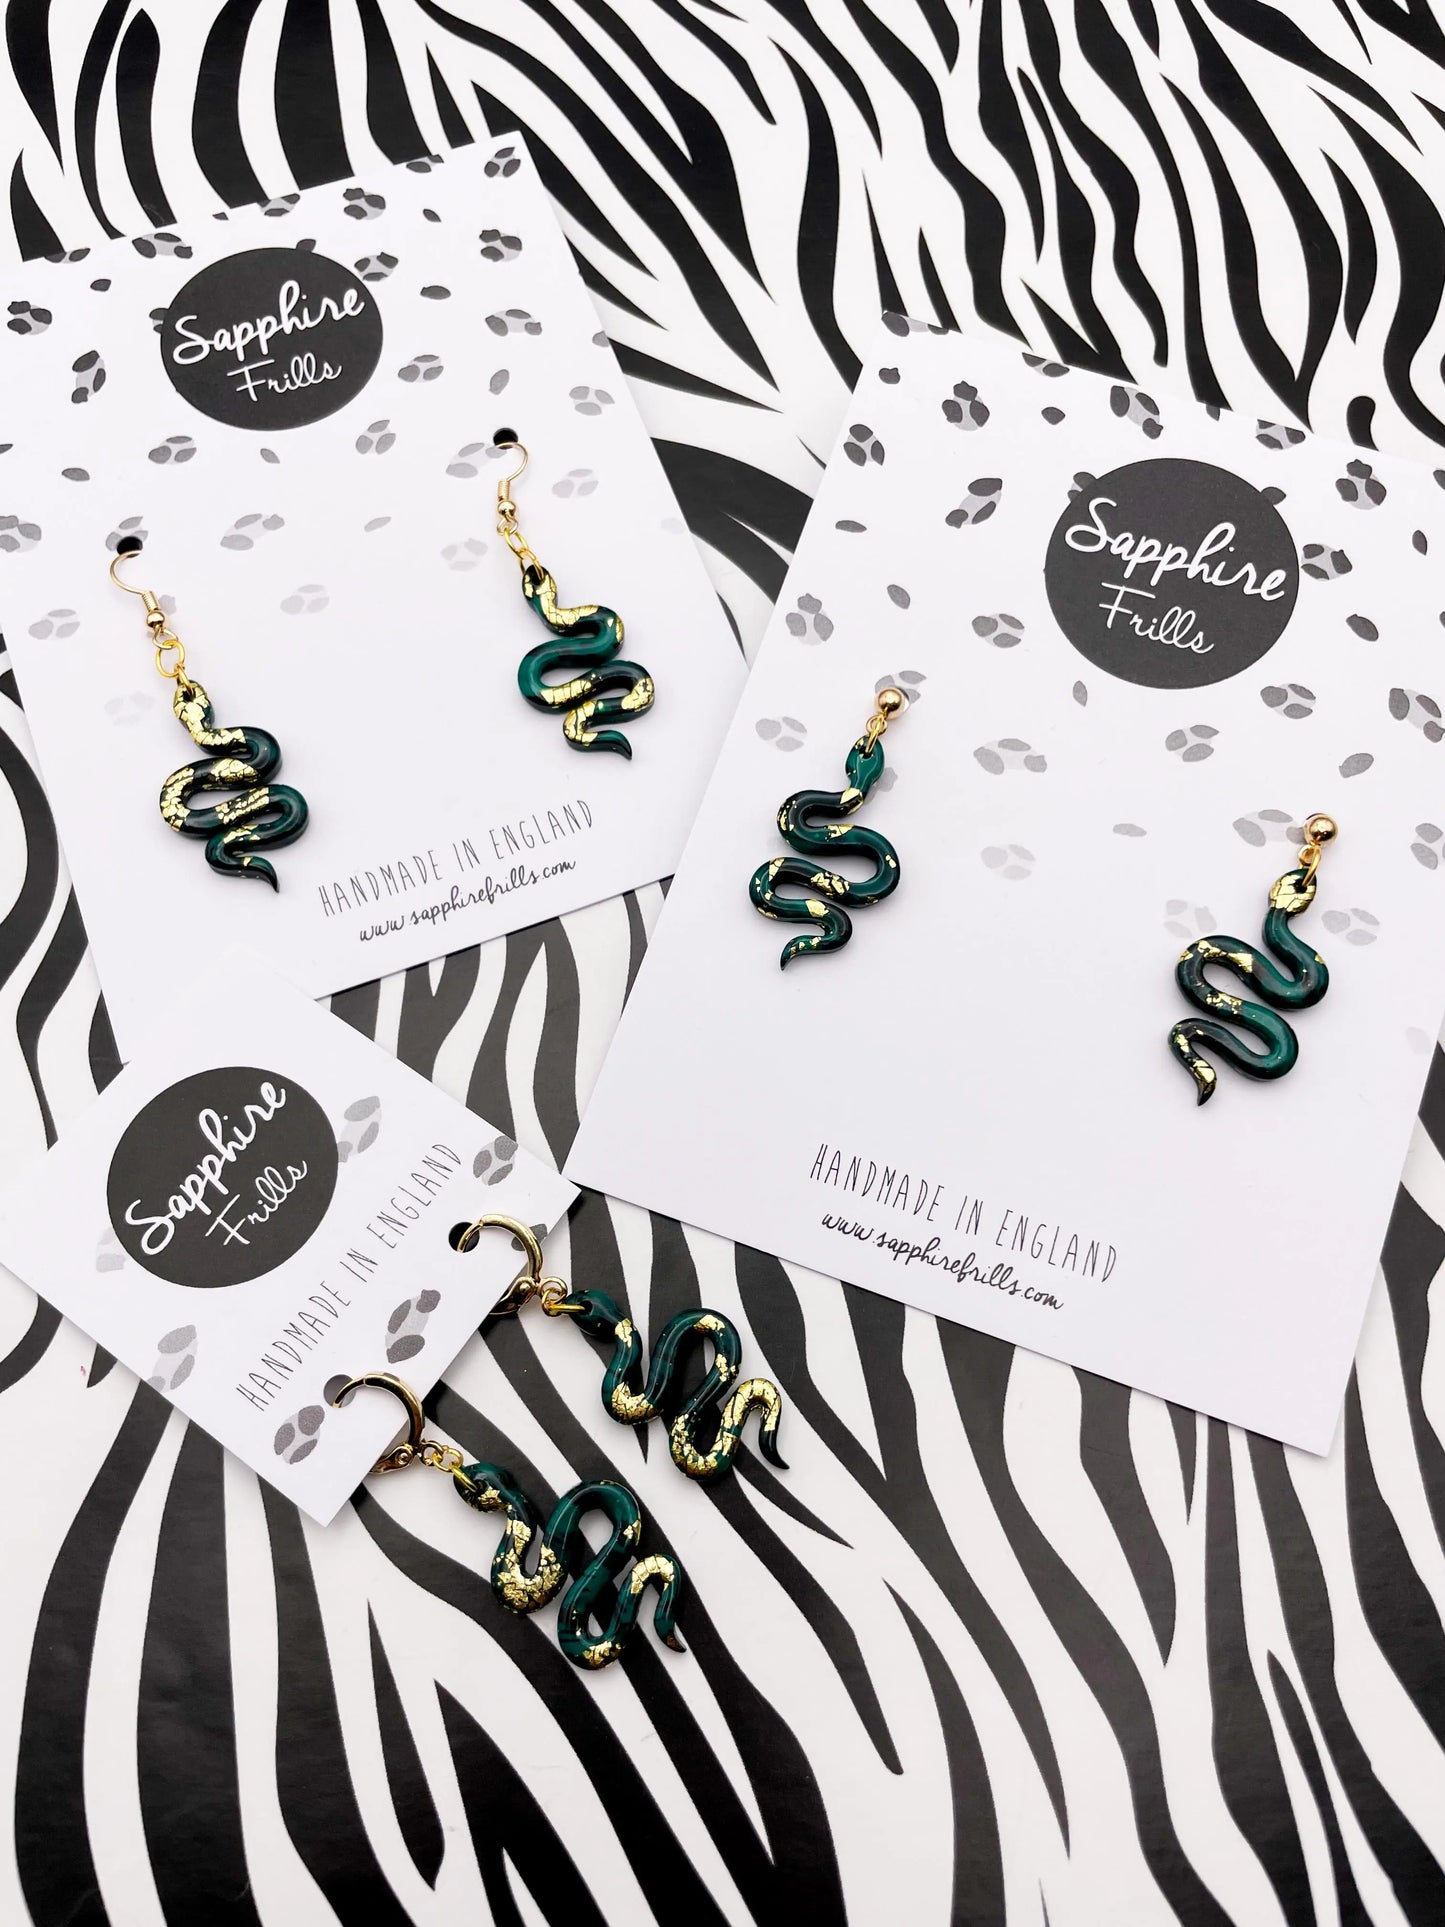 Small Emerald and Black Marble with Gold Foil Snake Dangle Earrings from Sapphire Frills